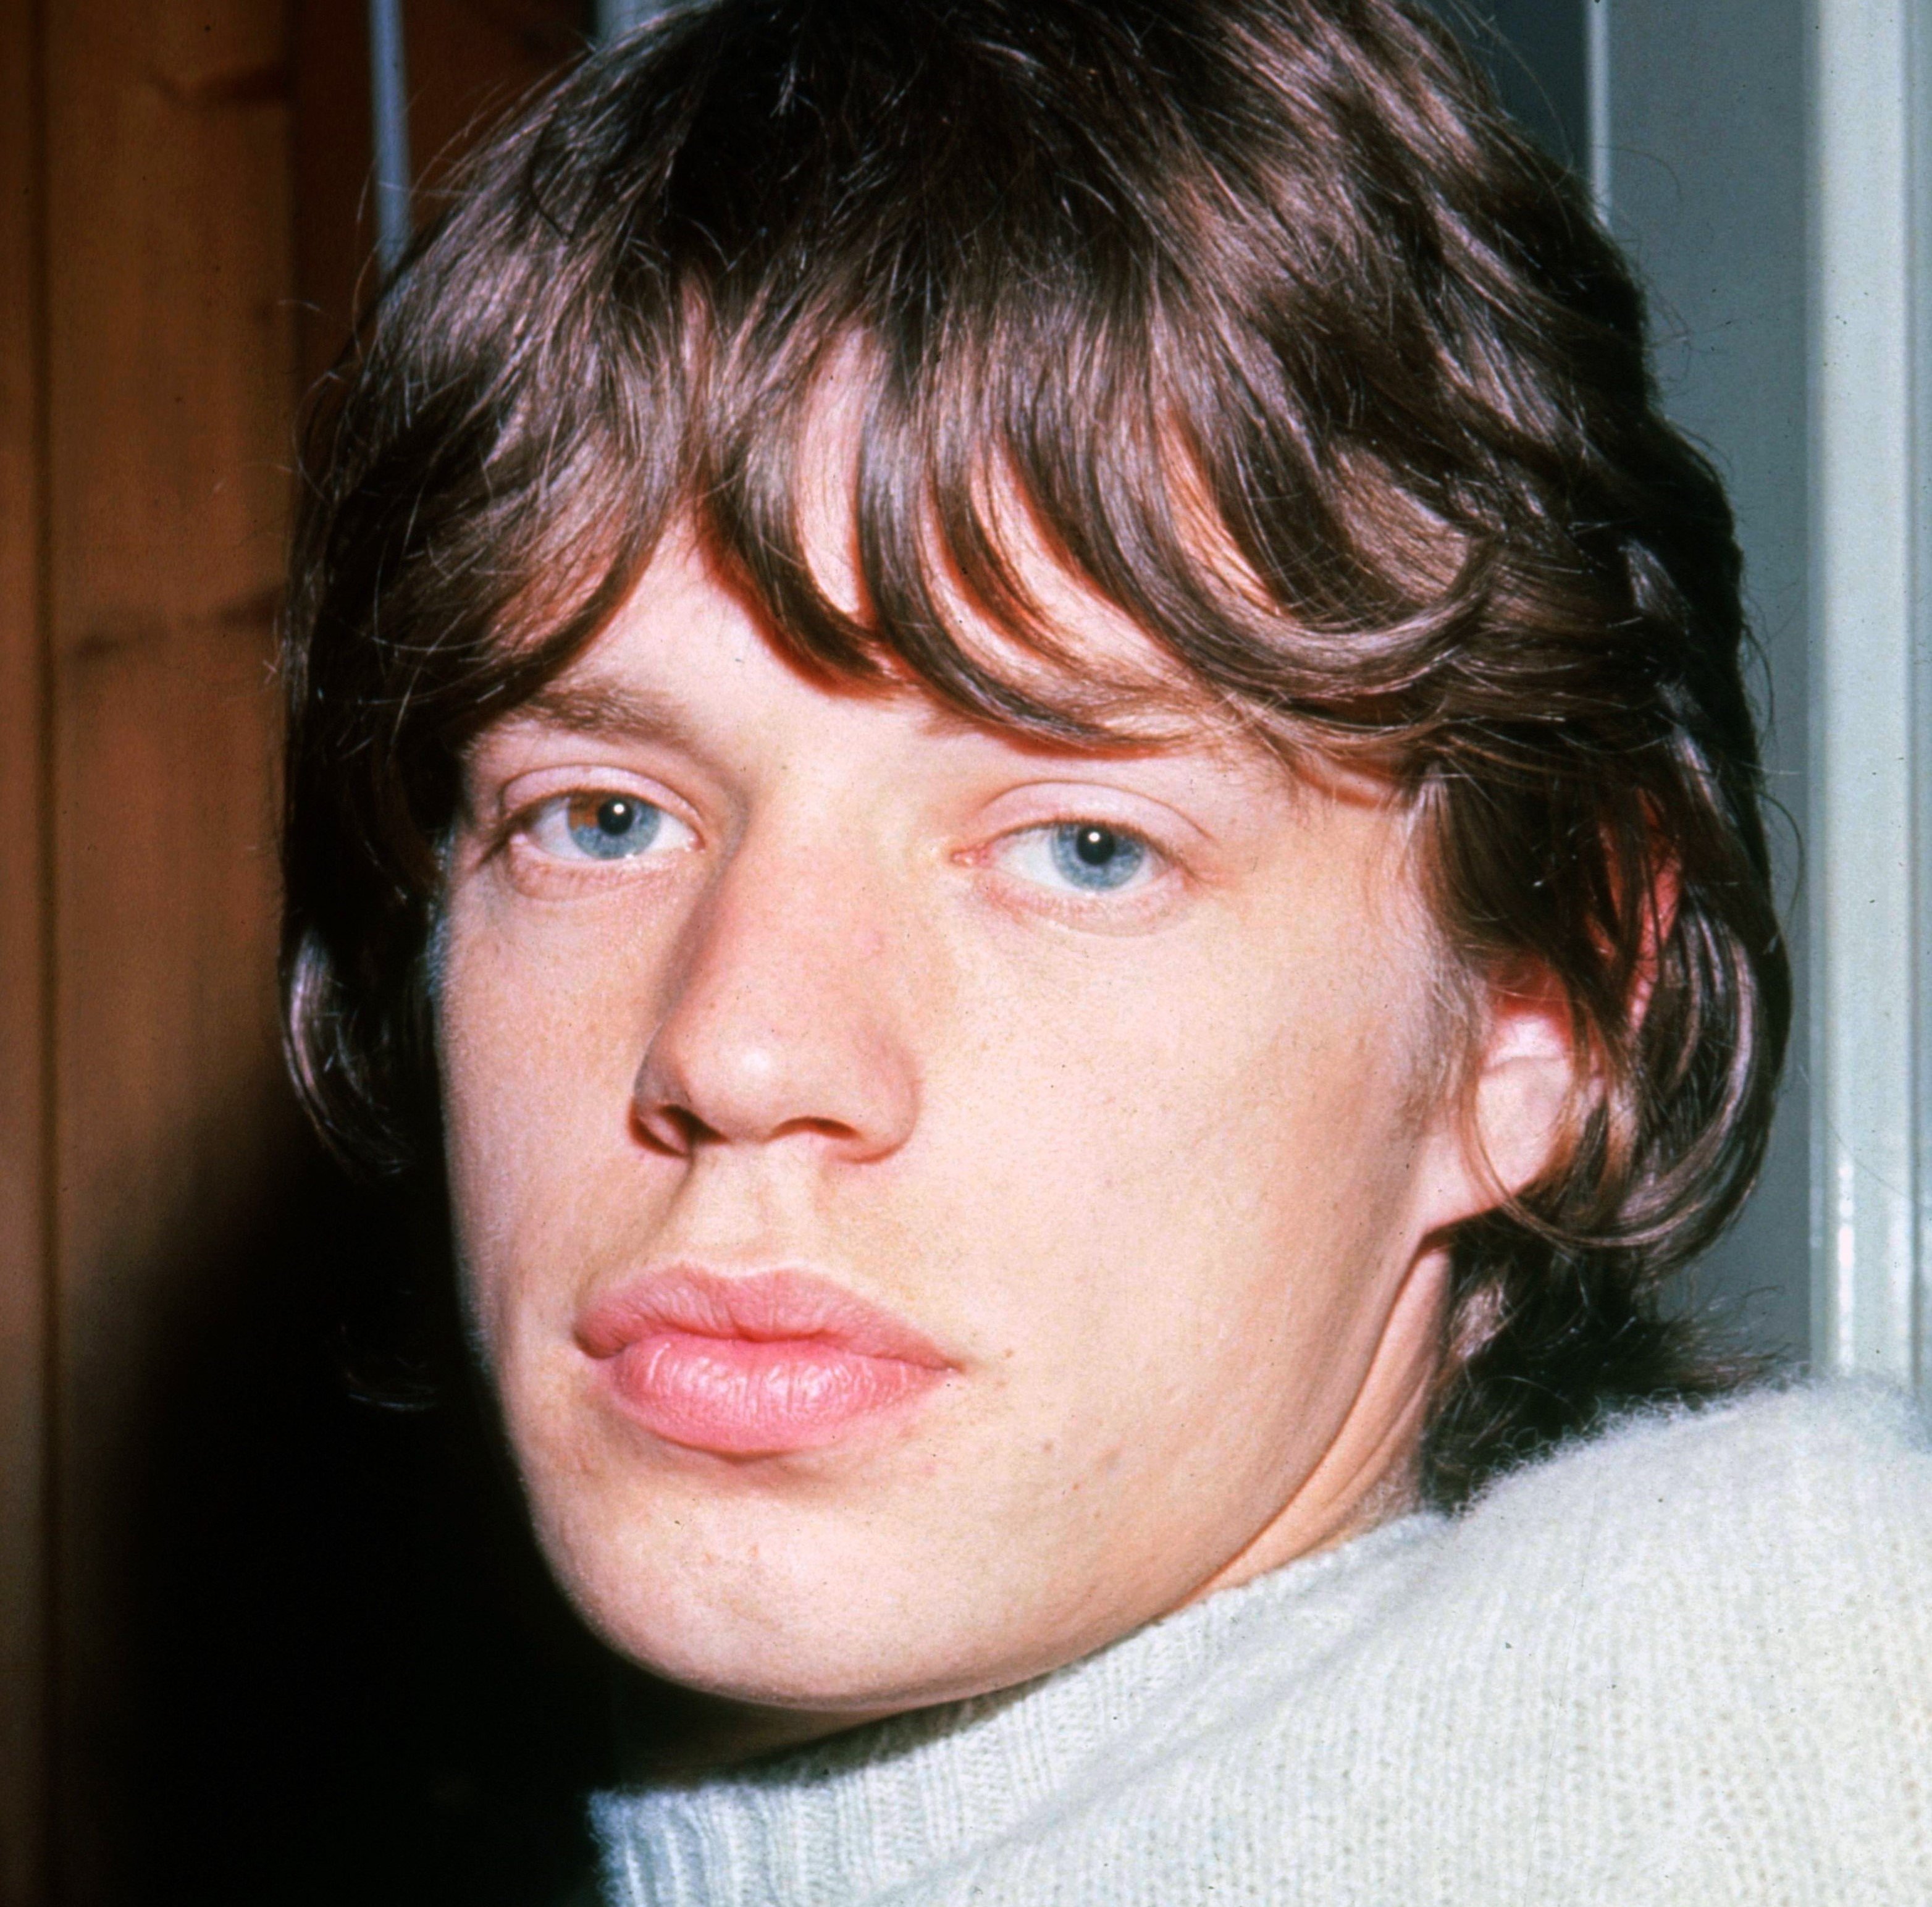 The Rolling Stones' Mick Jagger wearing a sweater